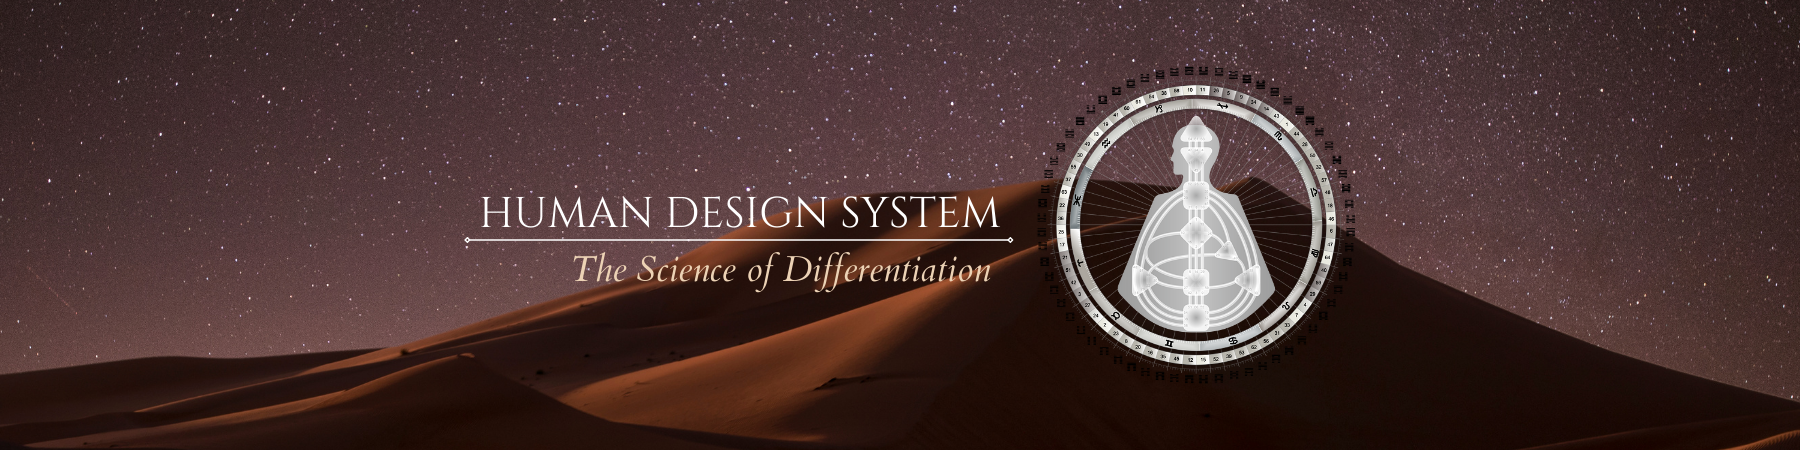 Human Design System - The Science of Differentiation